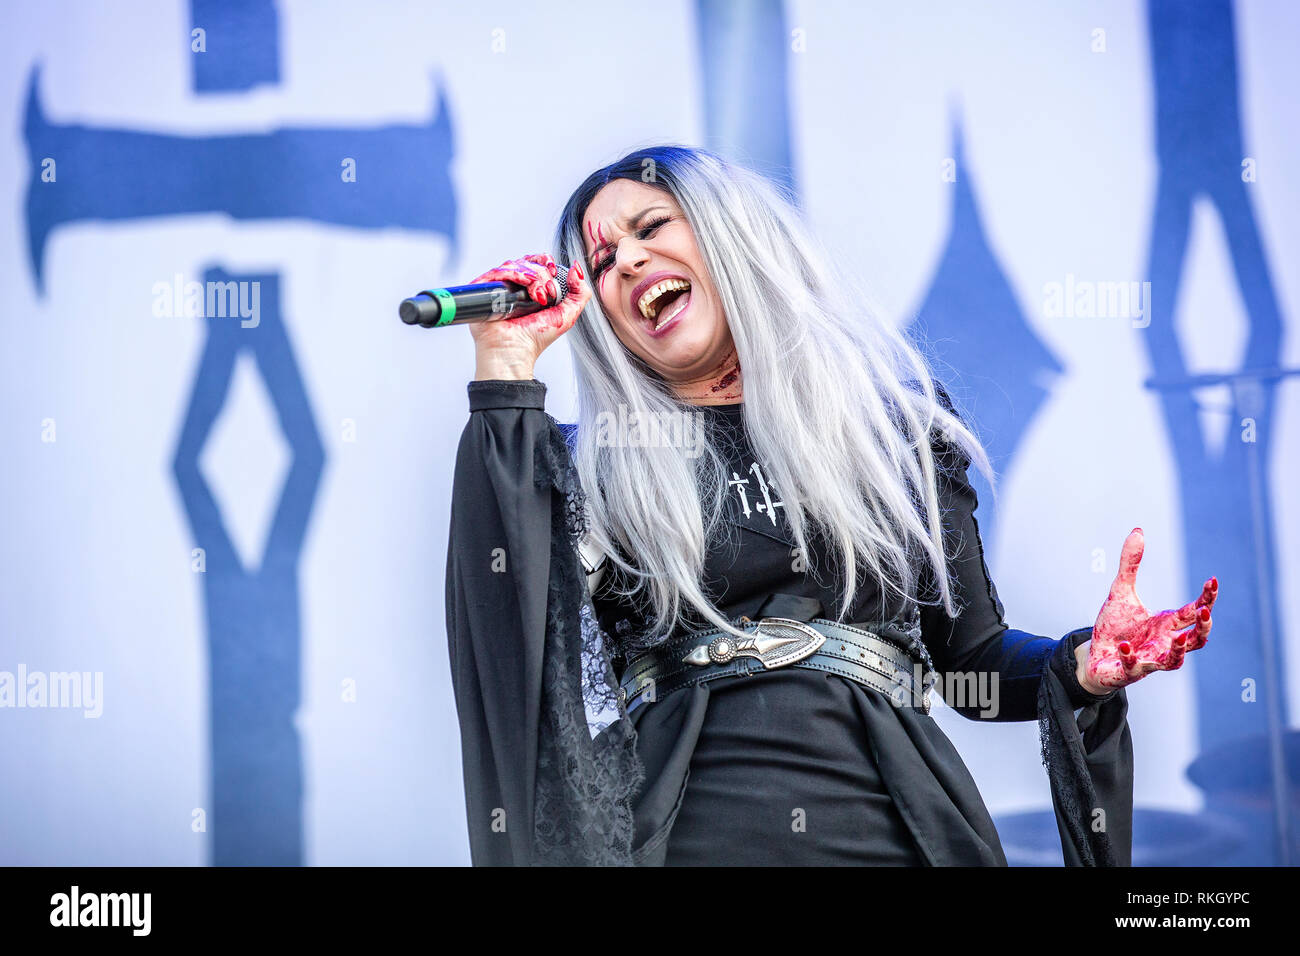 Sweden, Solvesborg - June 8, 2018. The Italian gothic matal band Lacuna  Coil performs a live concert during the Swedish music festival Sweden Rock  Festival 2018. Here vocalist Cristina Scabbia is seen